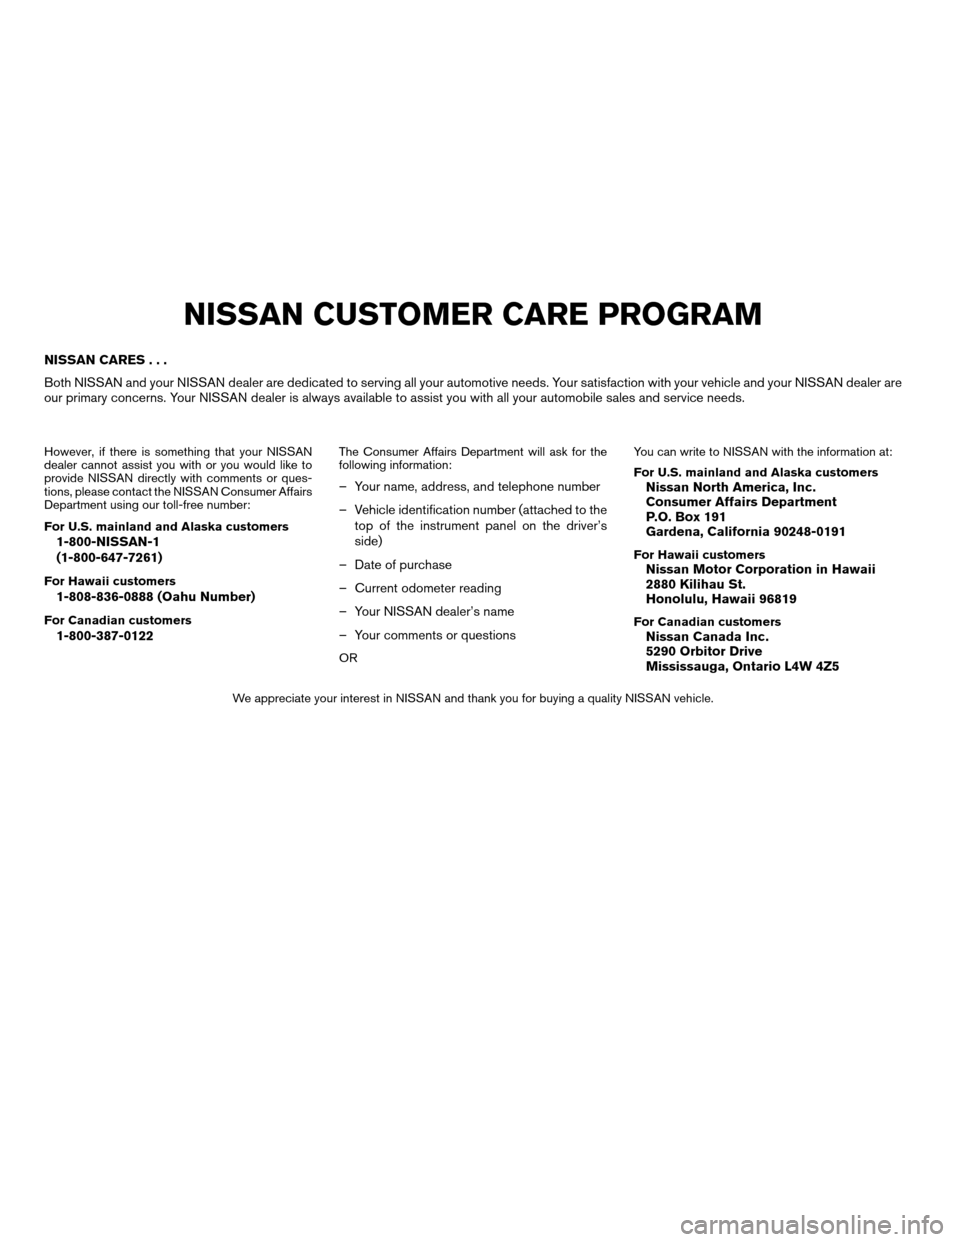 NISSAN MAXIMA 2004 A34 / 6.G Owners Manual NISSAN CARES...
Both NISSAN and your NISSAN dealer are dedicated to serving all your automotive needs. Your satisfaction with your vehicle and your NISSAN dealer are
our primary concerns. Your NISSAN 